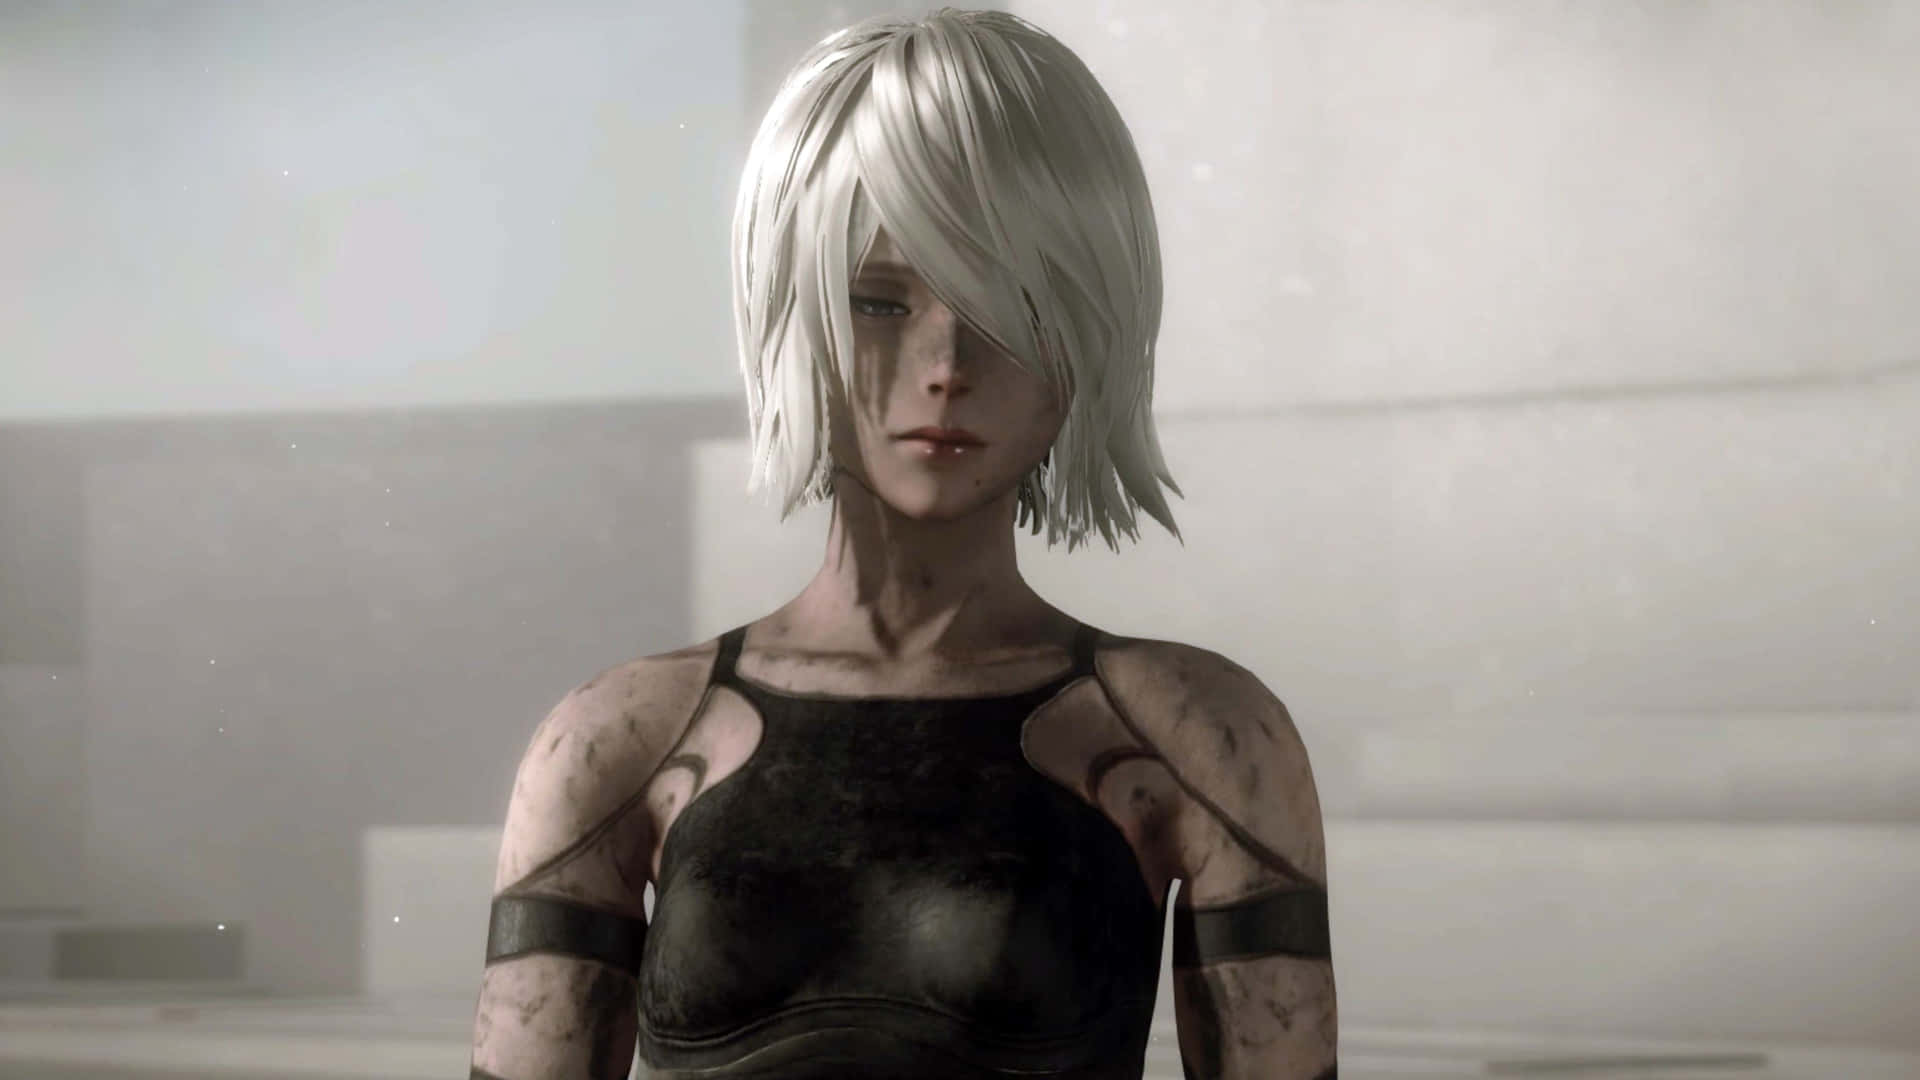 Play as 2b and explore a mysterious, dystopian world